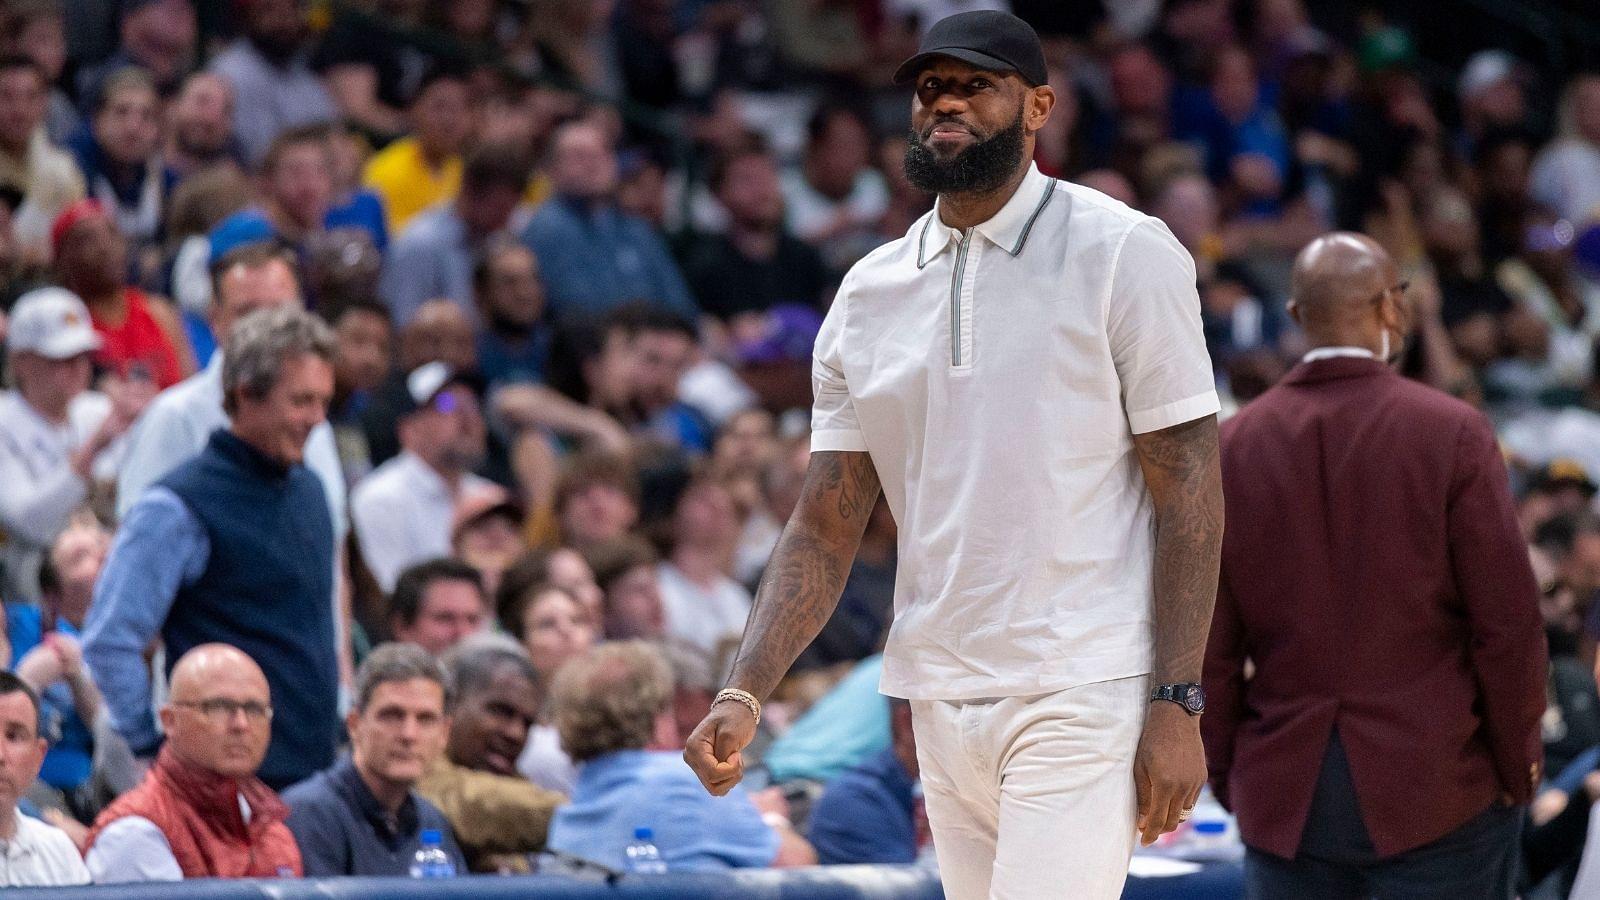 "If not for LeBron James, Lakers would go 4-78": NBA Twitter believes the Purple and Gold MVP has been that much of a difference-maker for his team this season